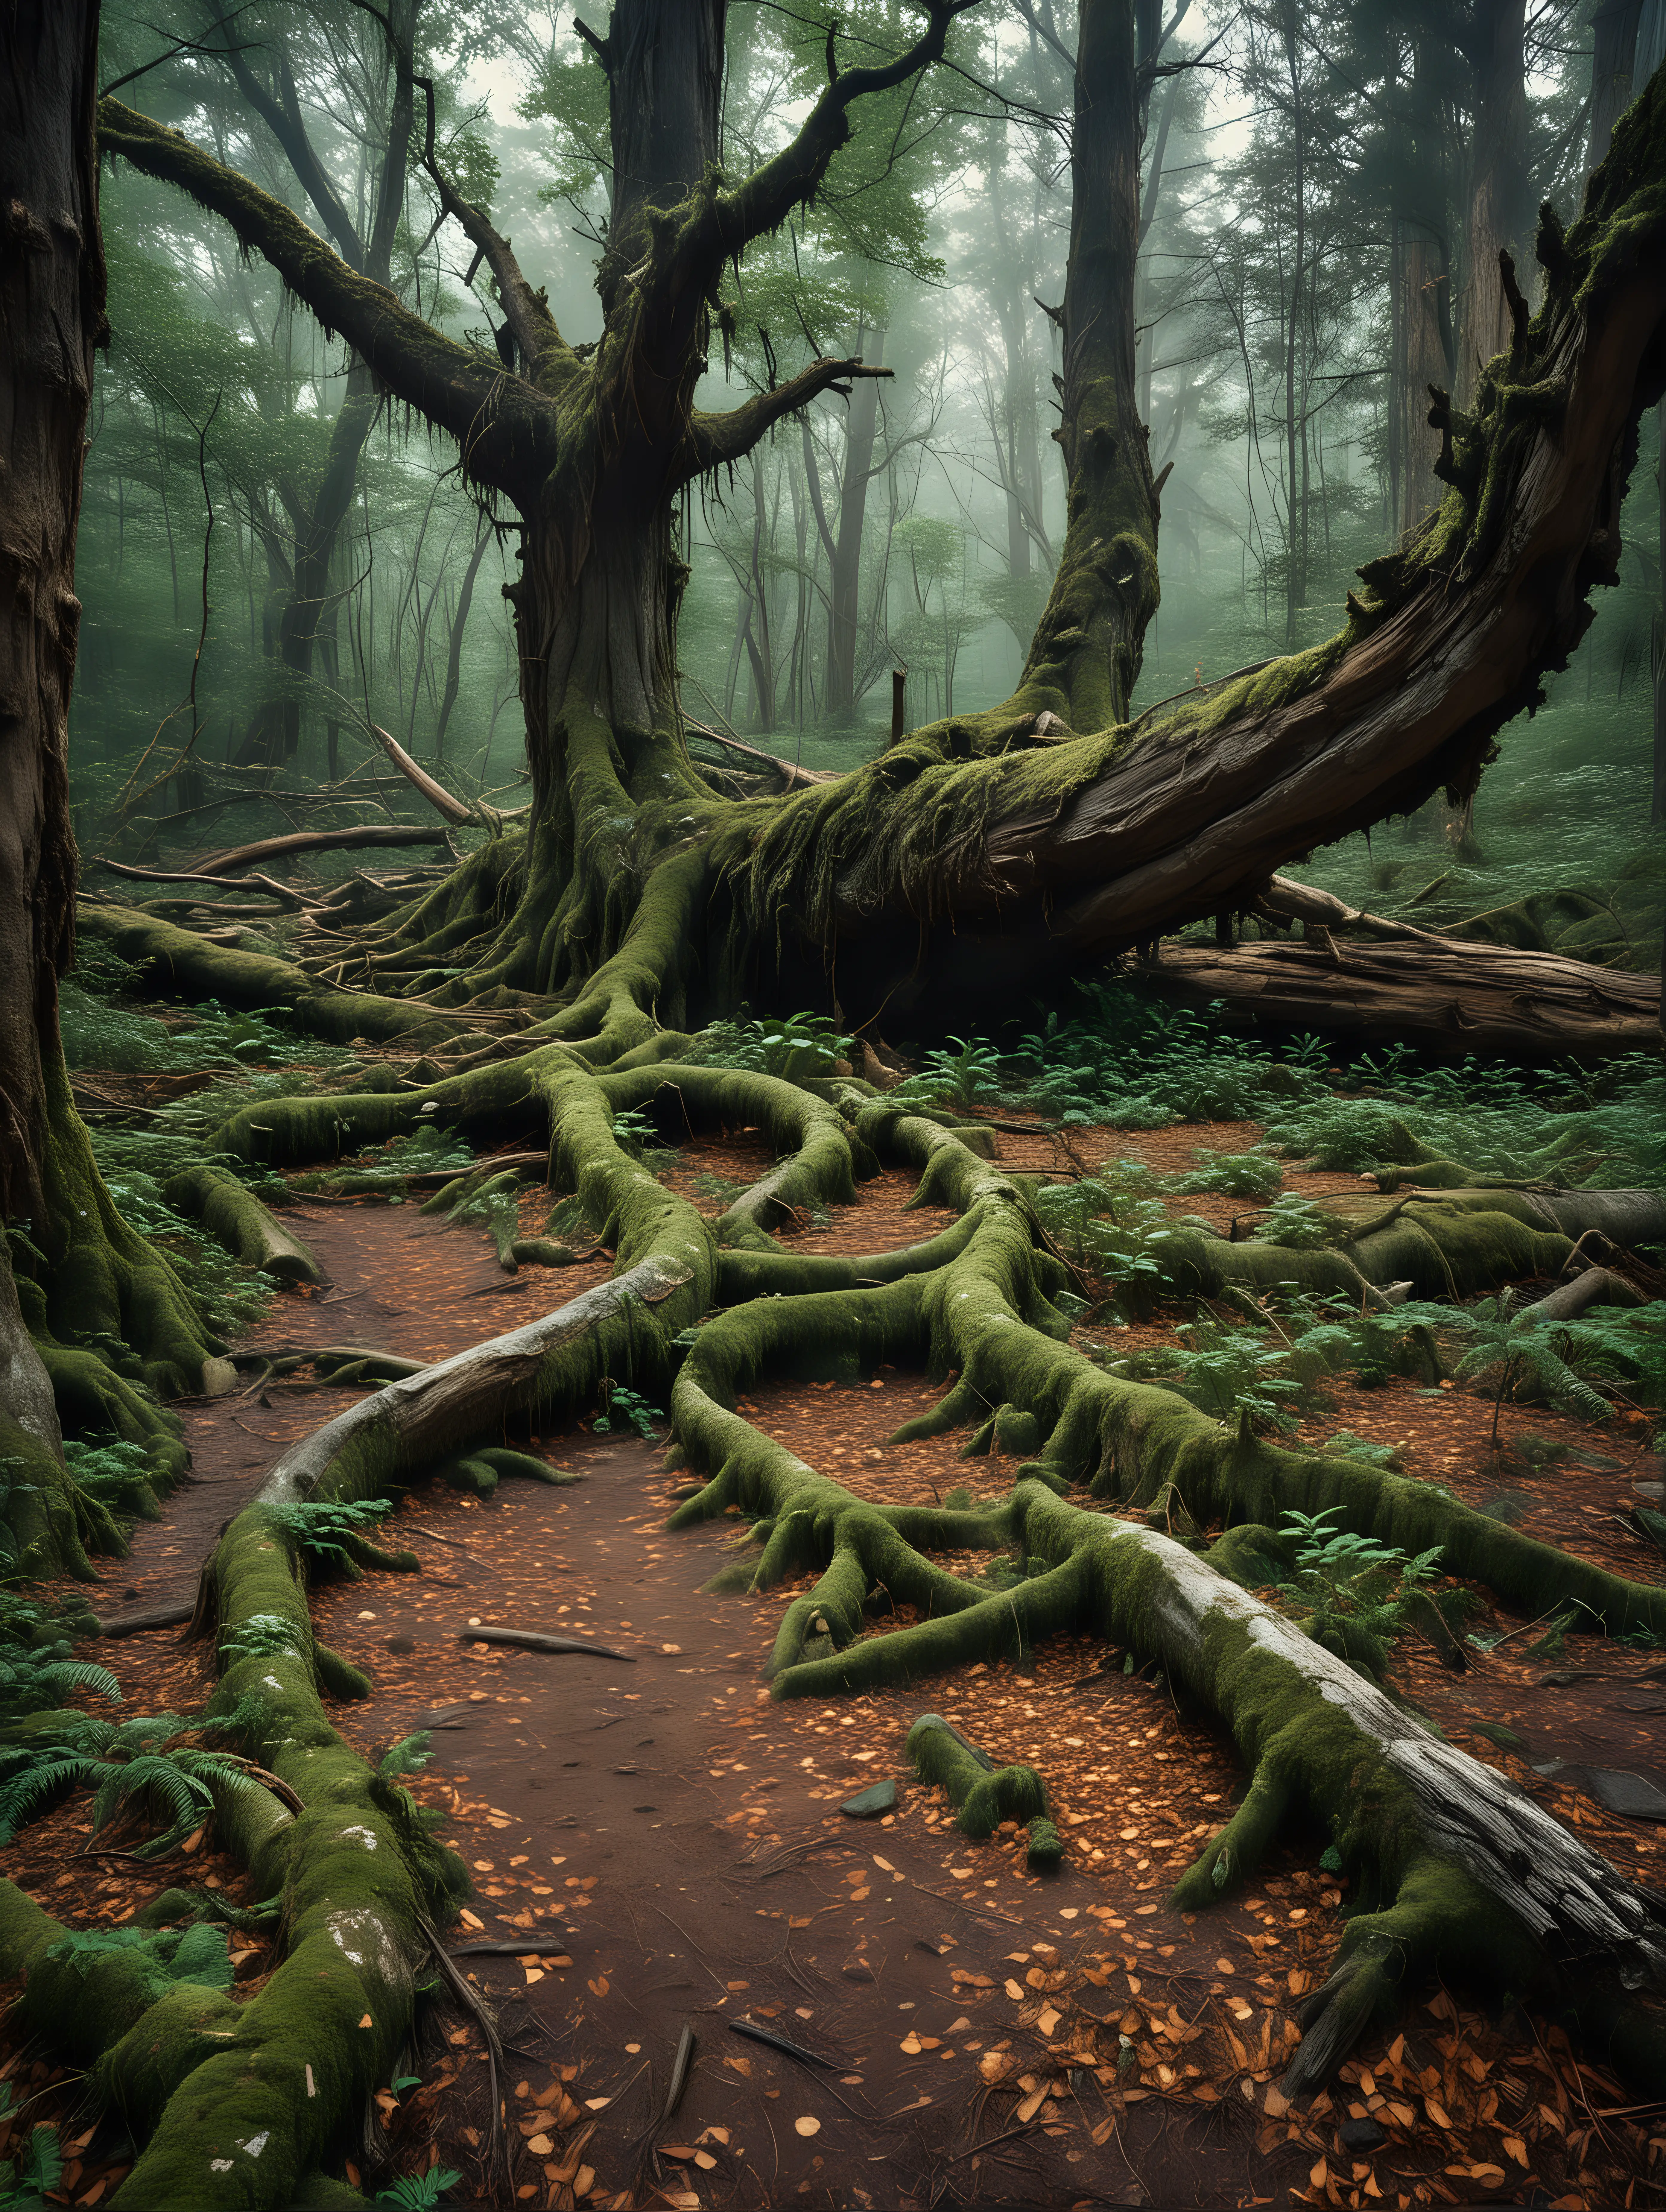 Enchanted Forest with Ancient Trees and Rotting Logs